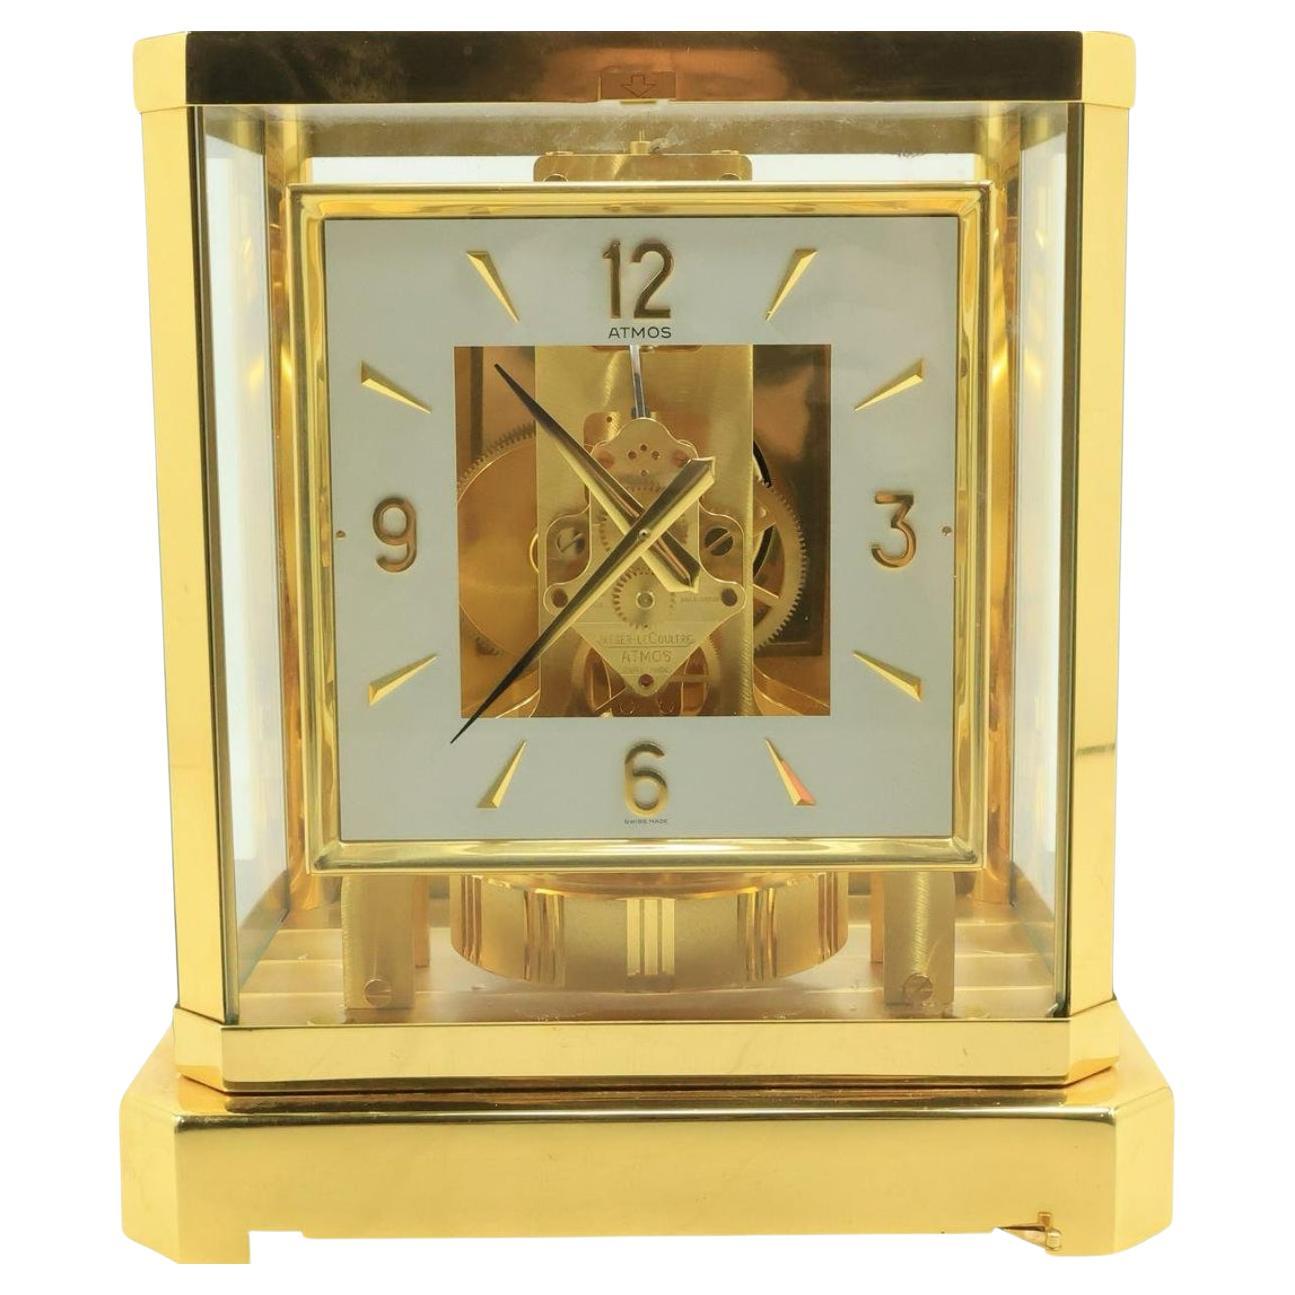 Le Coultre Atmos 15 Jewels Swiss Shelf Clock Brass Case 9.25 in, x 8.25 in. For Sale